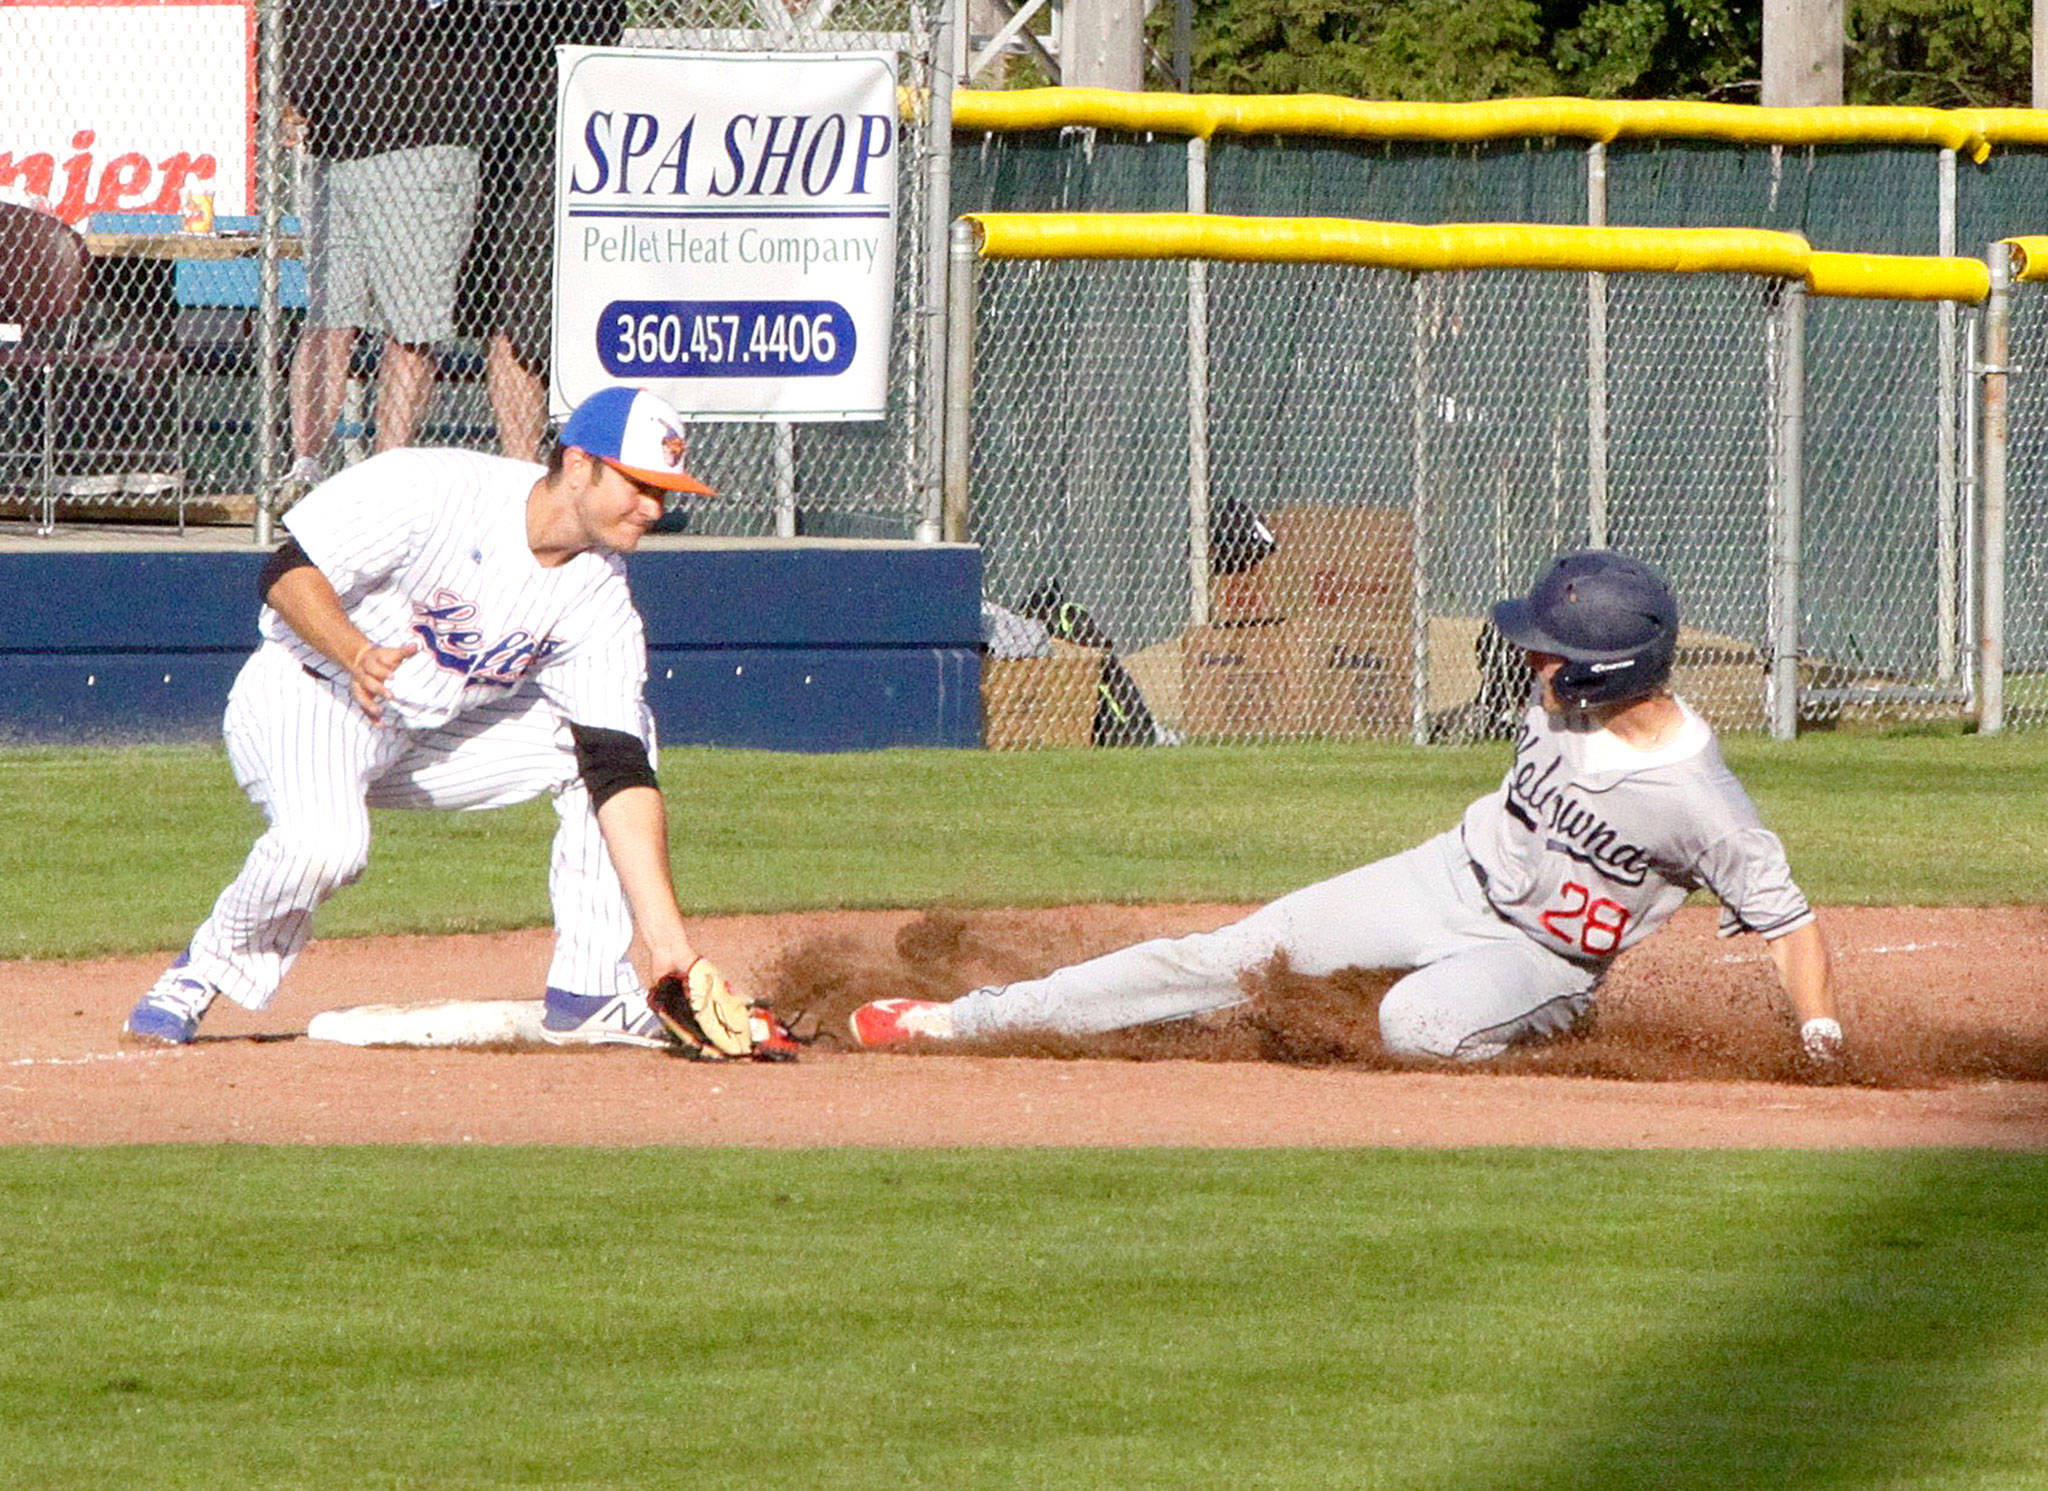 Dave Logan/for Peninsula Daily News Davis Todischuk of Kelowna slides safely into third under the tag of Lefties third baseman Jake Portaro in the second inning of Kelowna’s back-and-forth 8-7 win Monday evening.